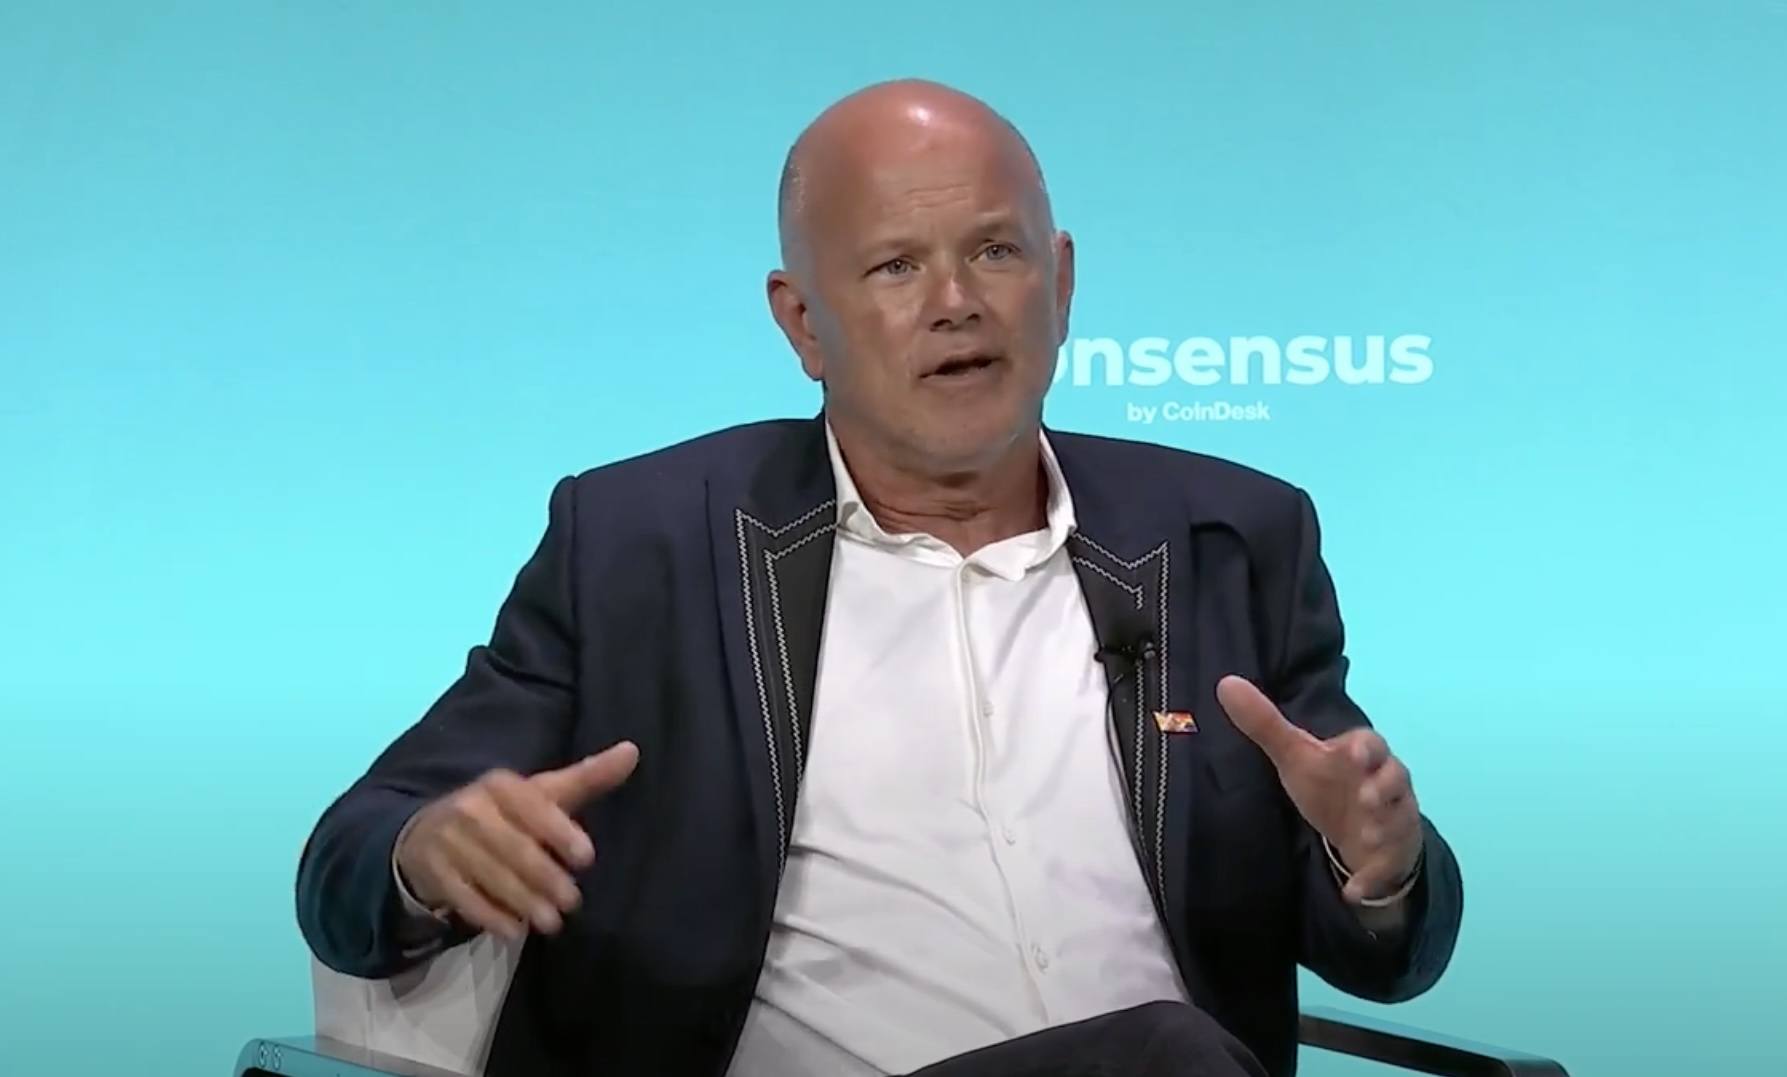 Galaxy Digital CEO on Future of Crypto Regulation in the US: ‘Common Sense Will Take Over’